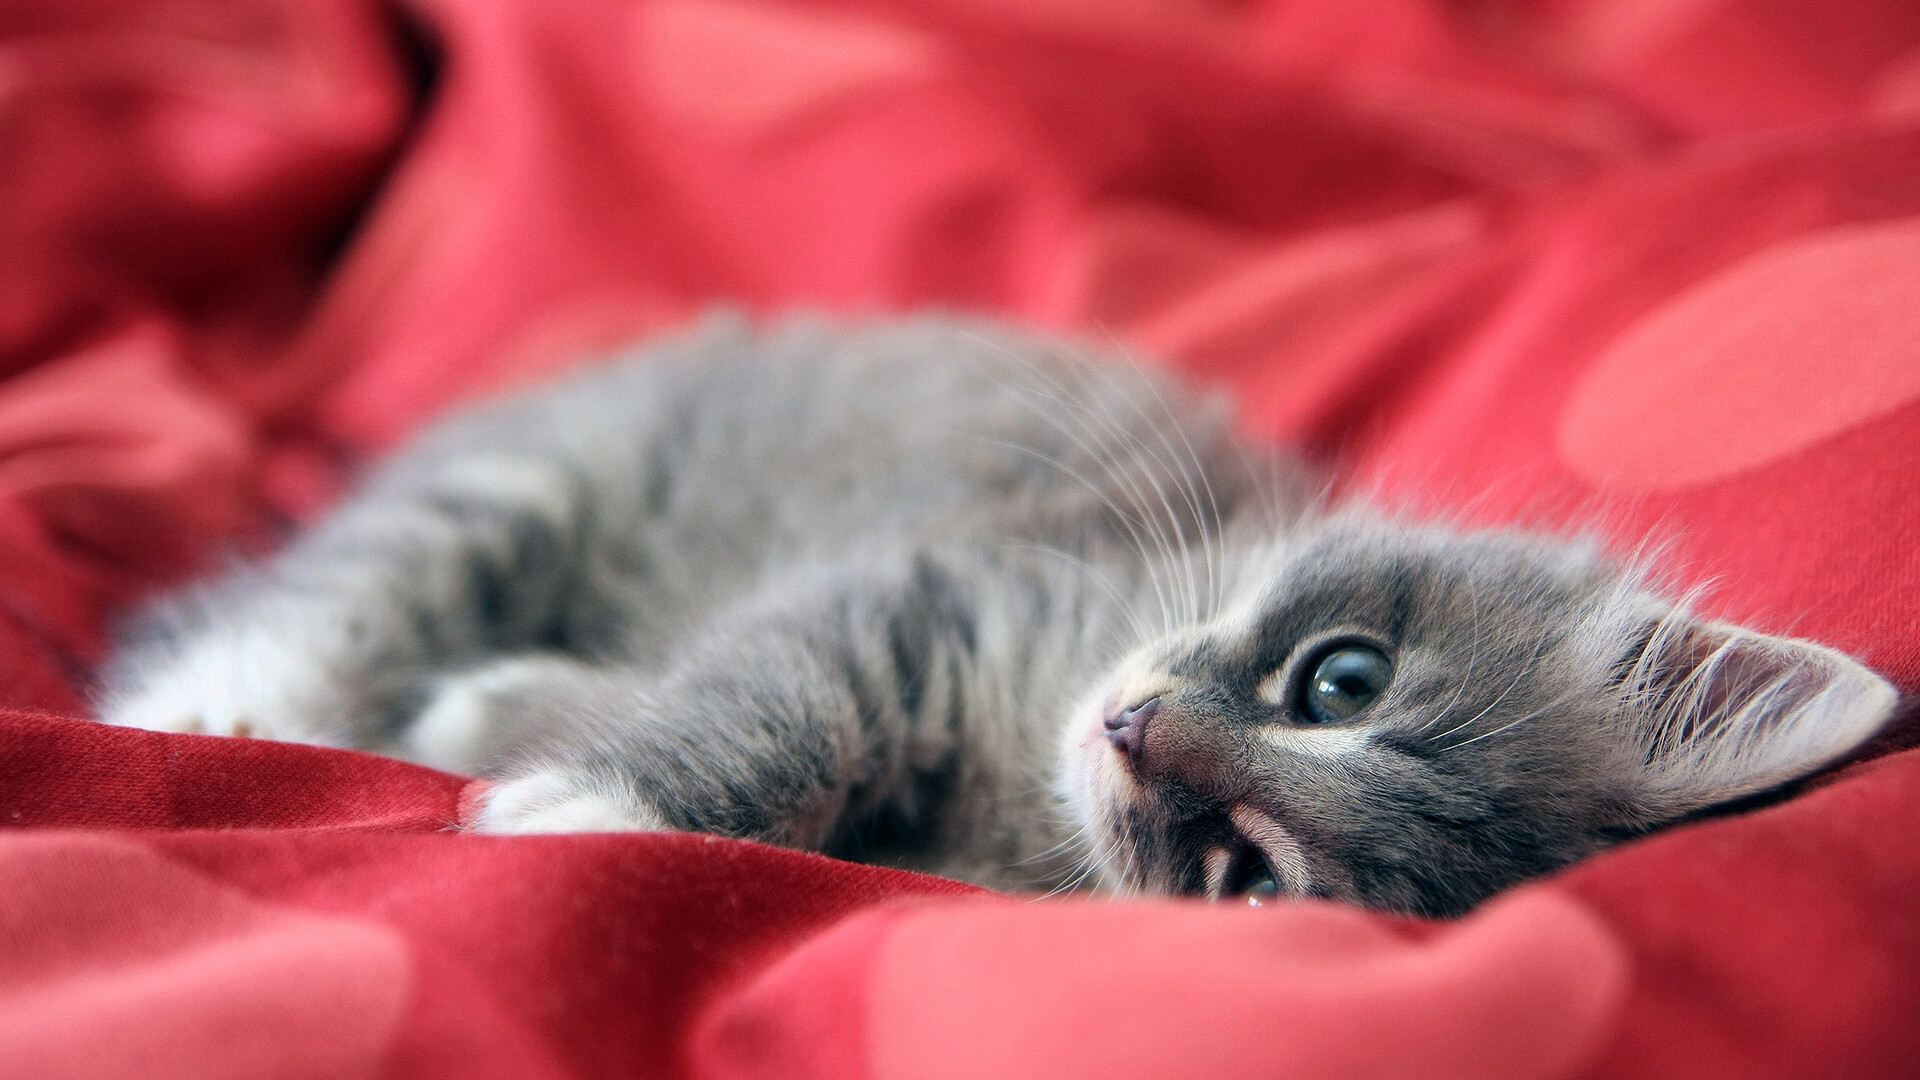 Kitten: Mammal with sharp teeth and claws, Feline. 1920x1080 Full HD Background.